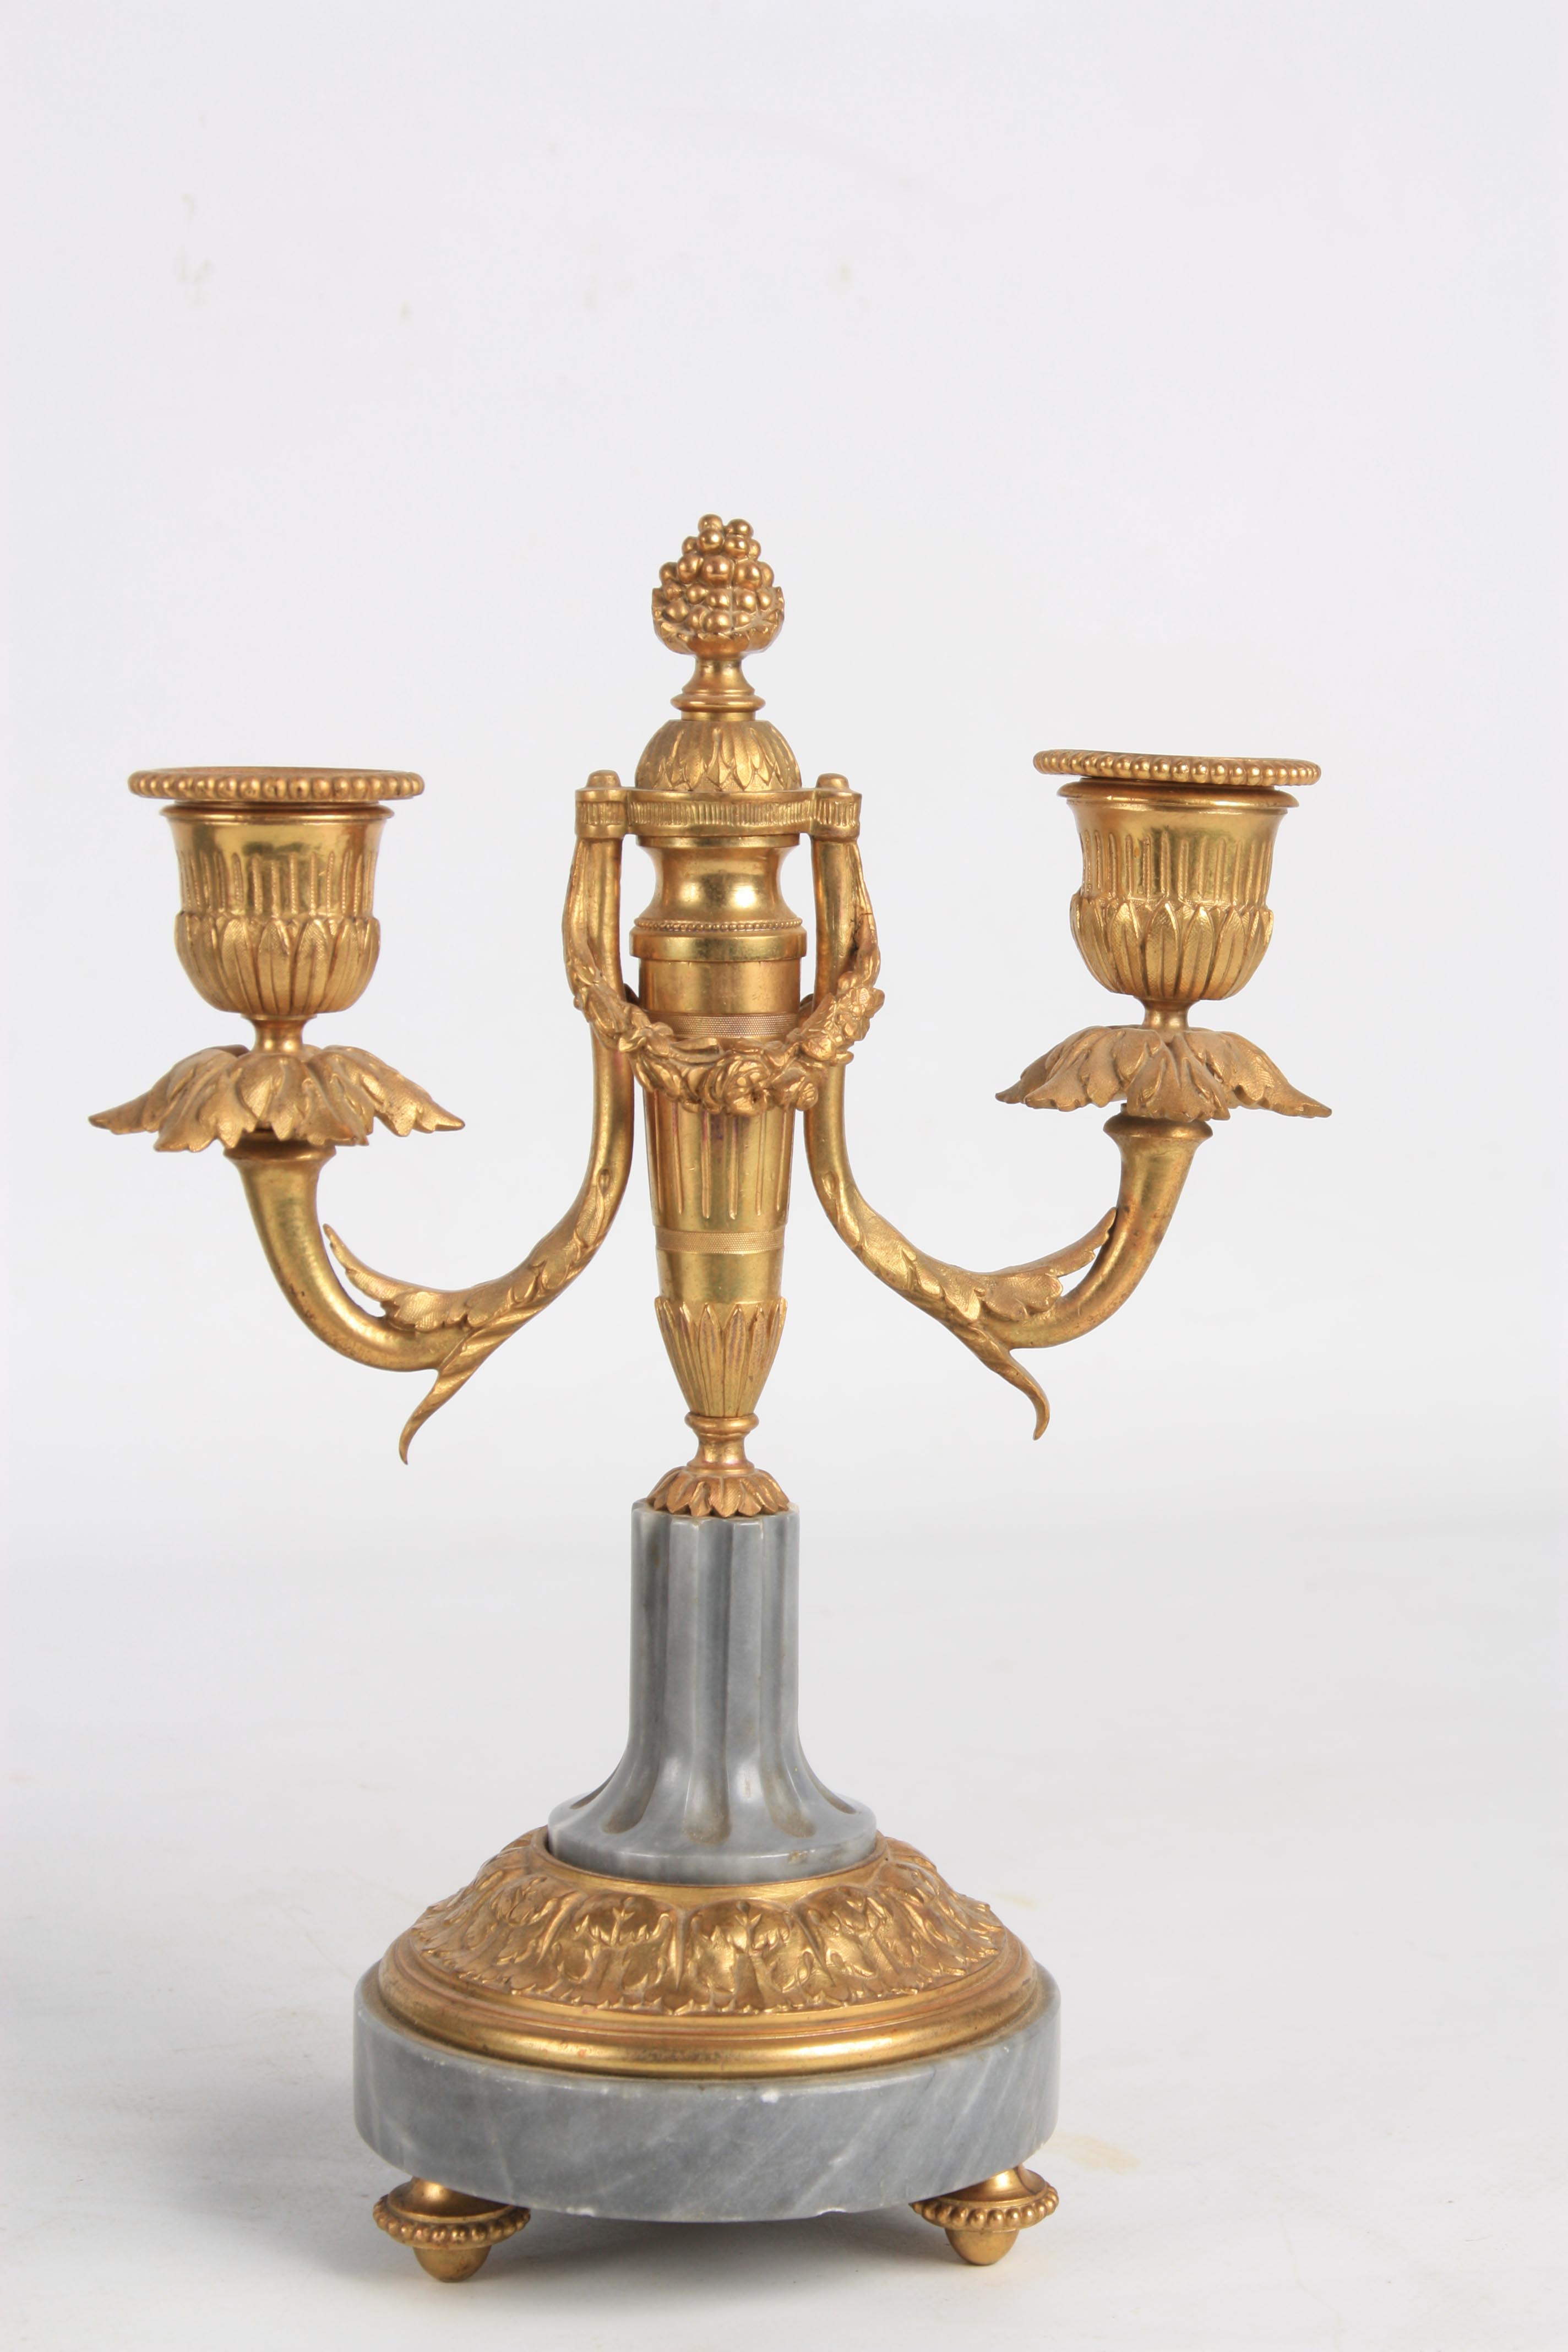 LEMERLE-CHARPENTIER & CIE, PARIS A MID 19TH CENTURY FRENCH MARBLE AND ORMOLU CLOCK GARNITURE the - Image 12 of 14